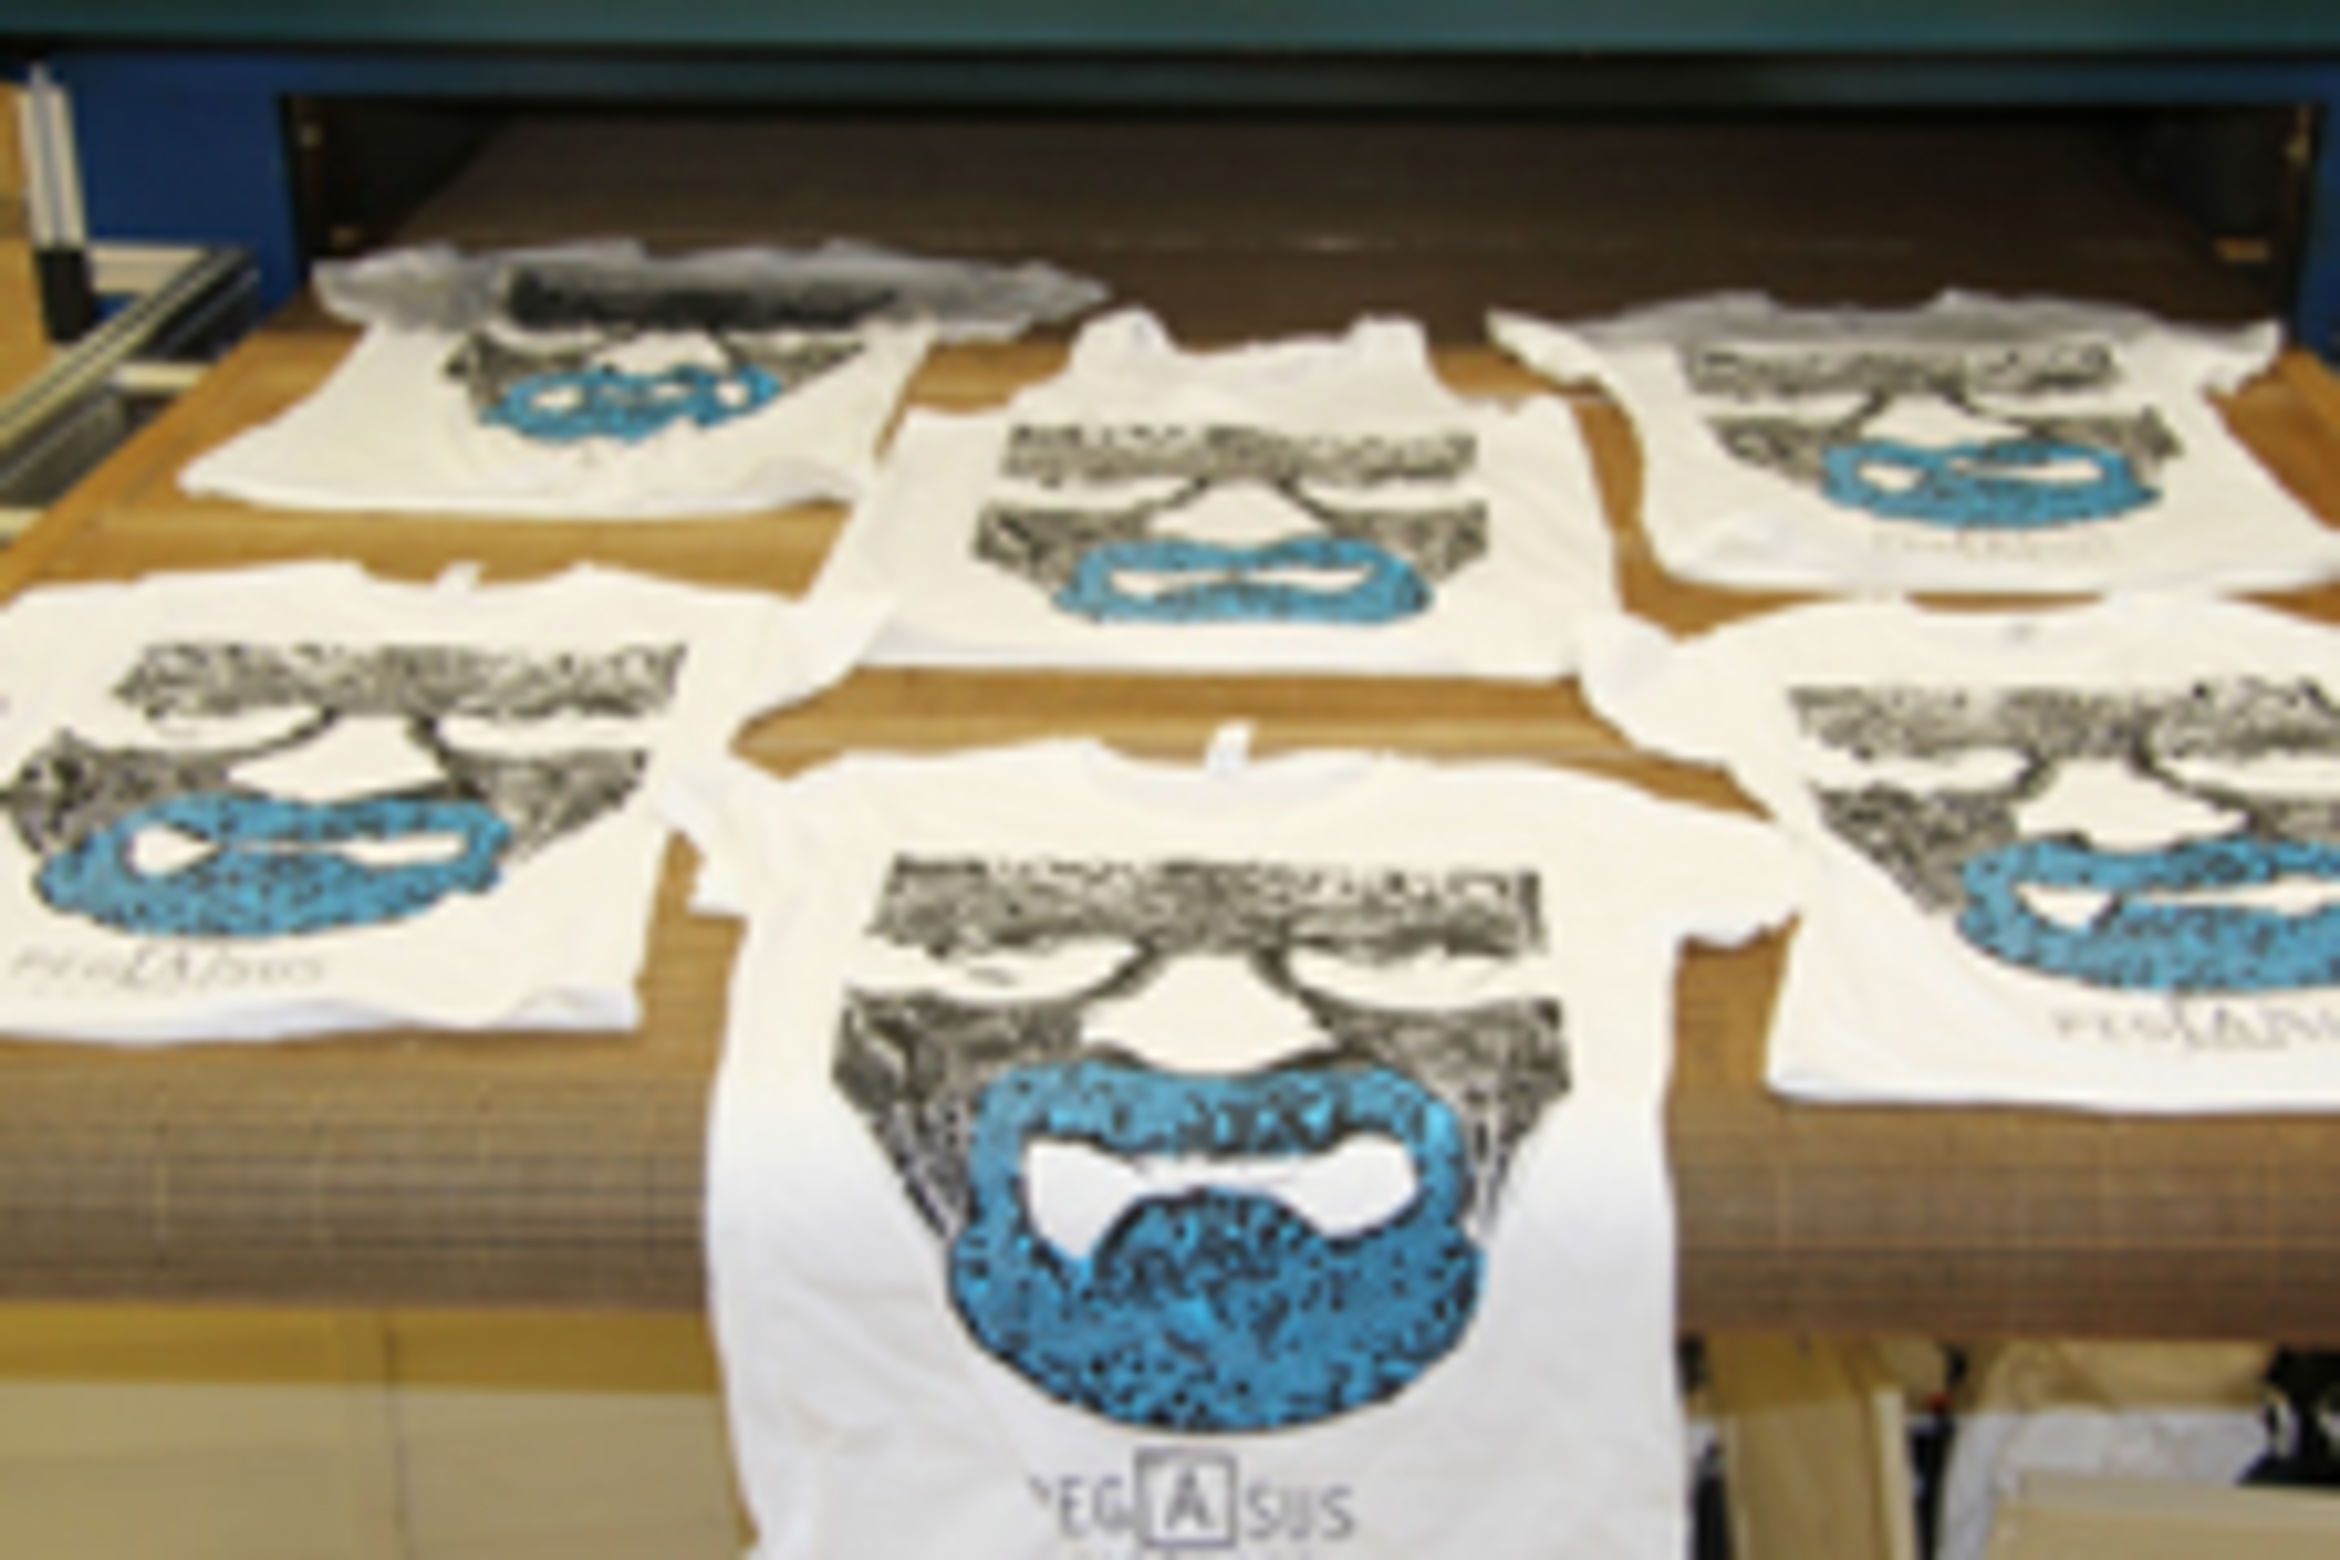 Screen Printed T-Shirts are Popular Choices